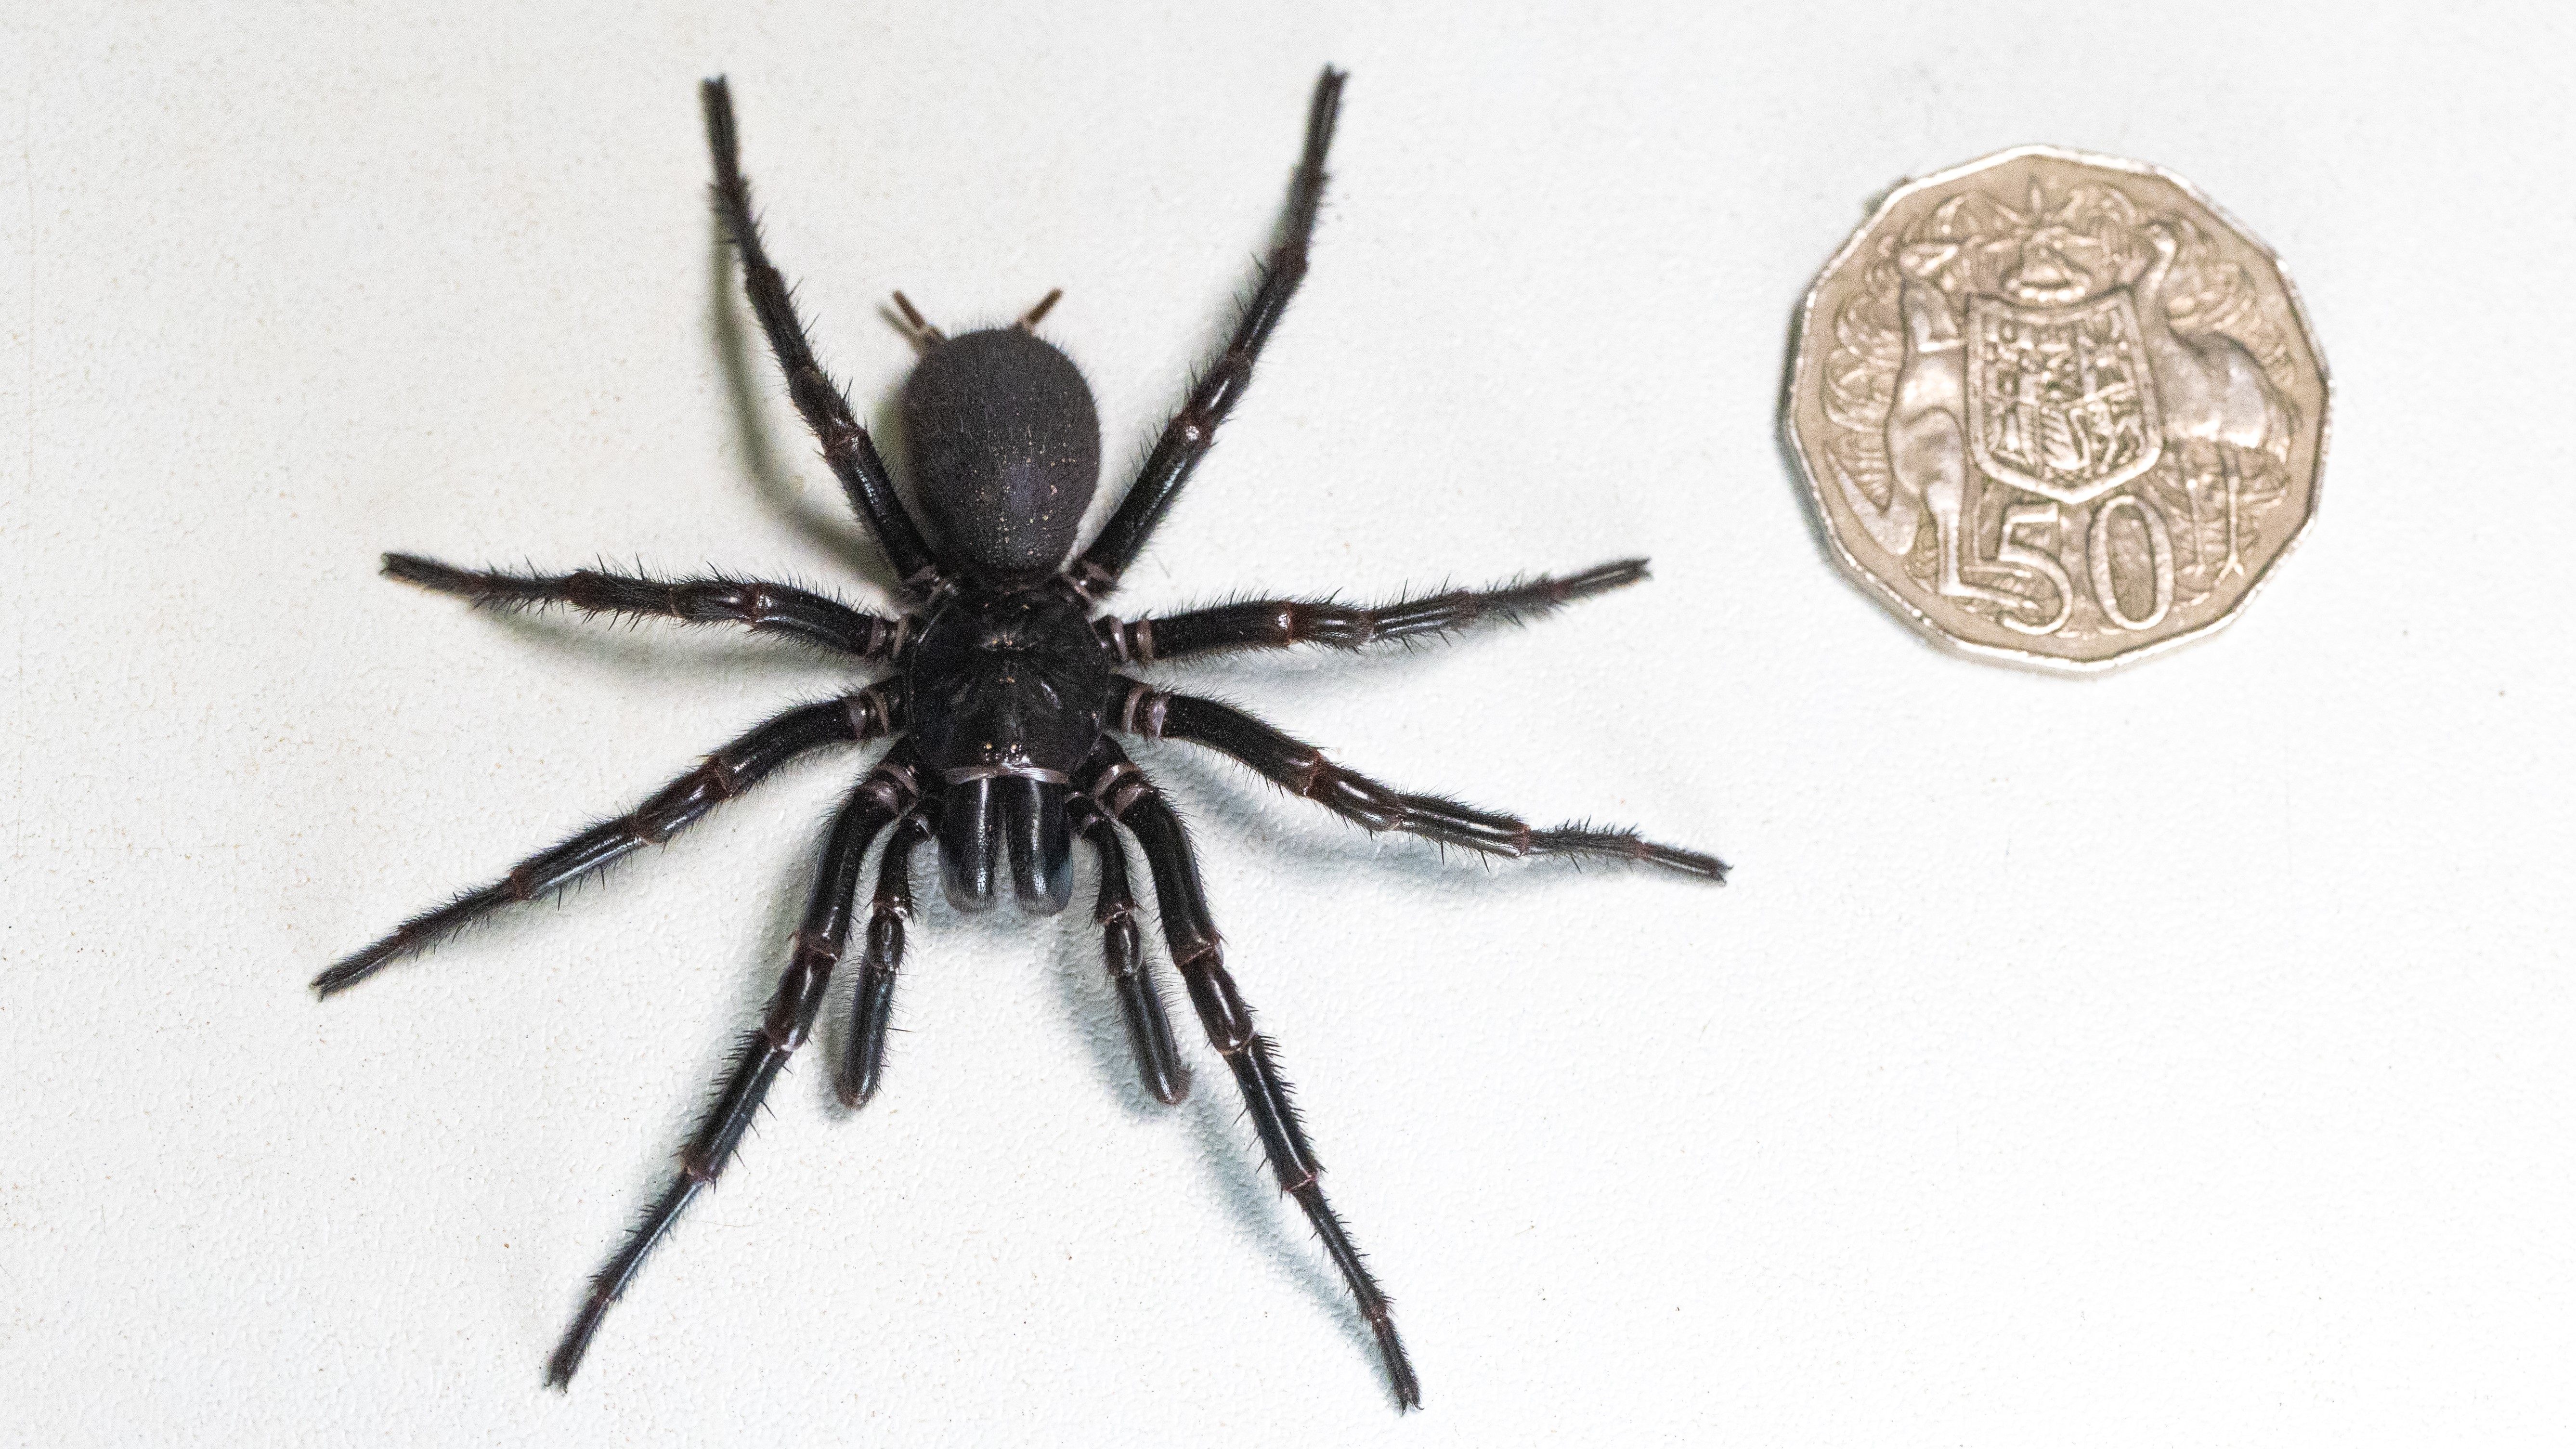 A large black funnel web spider on a white background with a coin to illustrate its size.